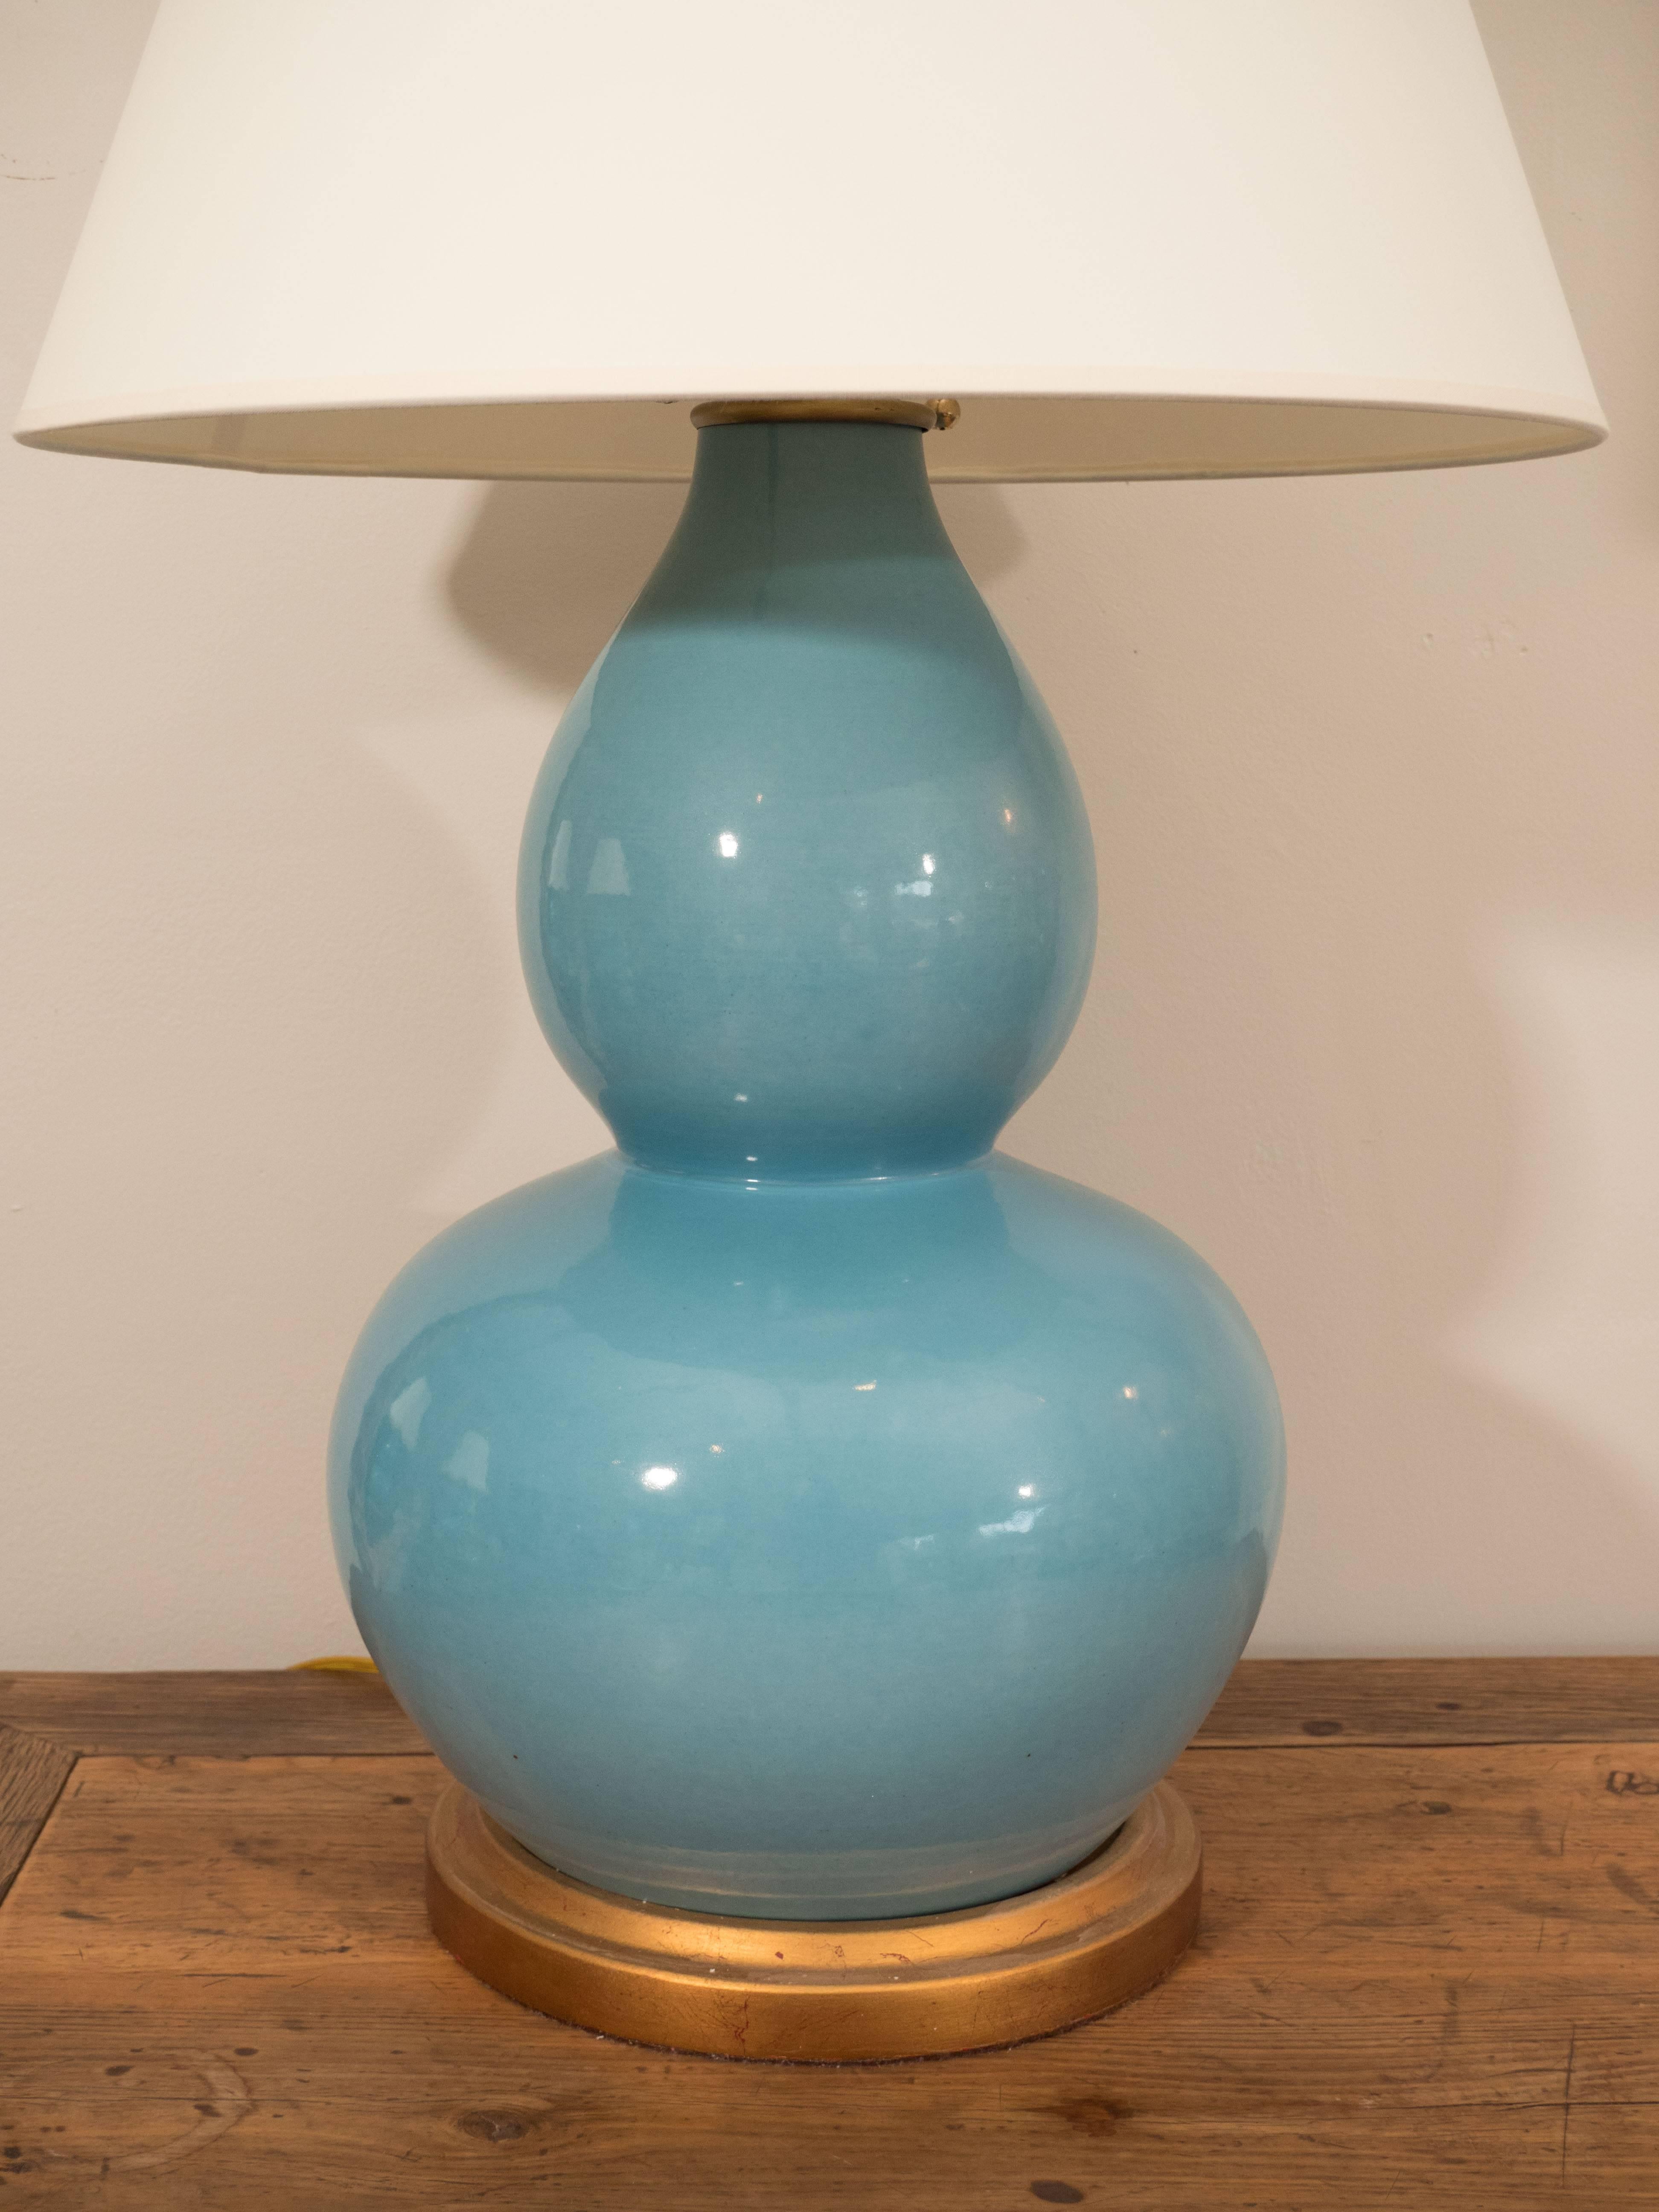 The mineral lamp by Bunny Williams Home. This pair of double gourd ceramic lamps on a gilt base are well made, versatile and cheerful. Their lovely shade of blue can work with neutrals, greens, creams, whites, browns. The perfect finishing touch in